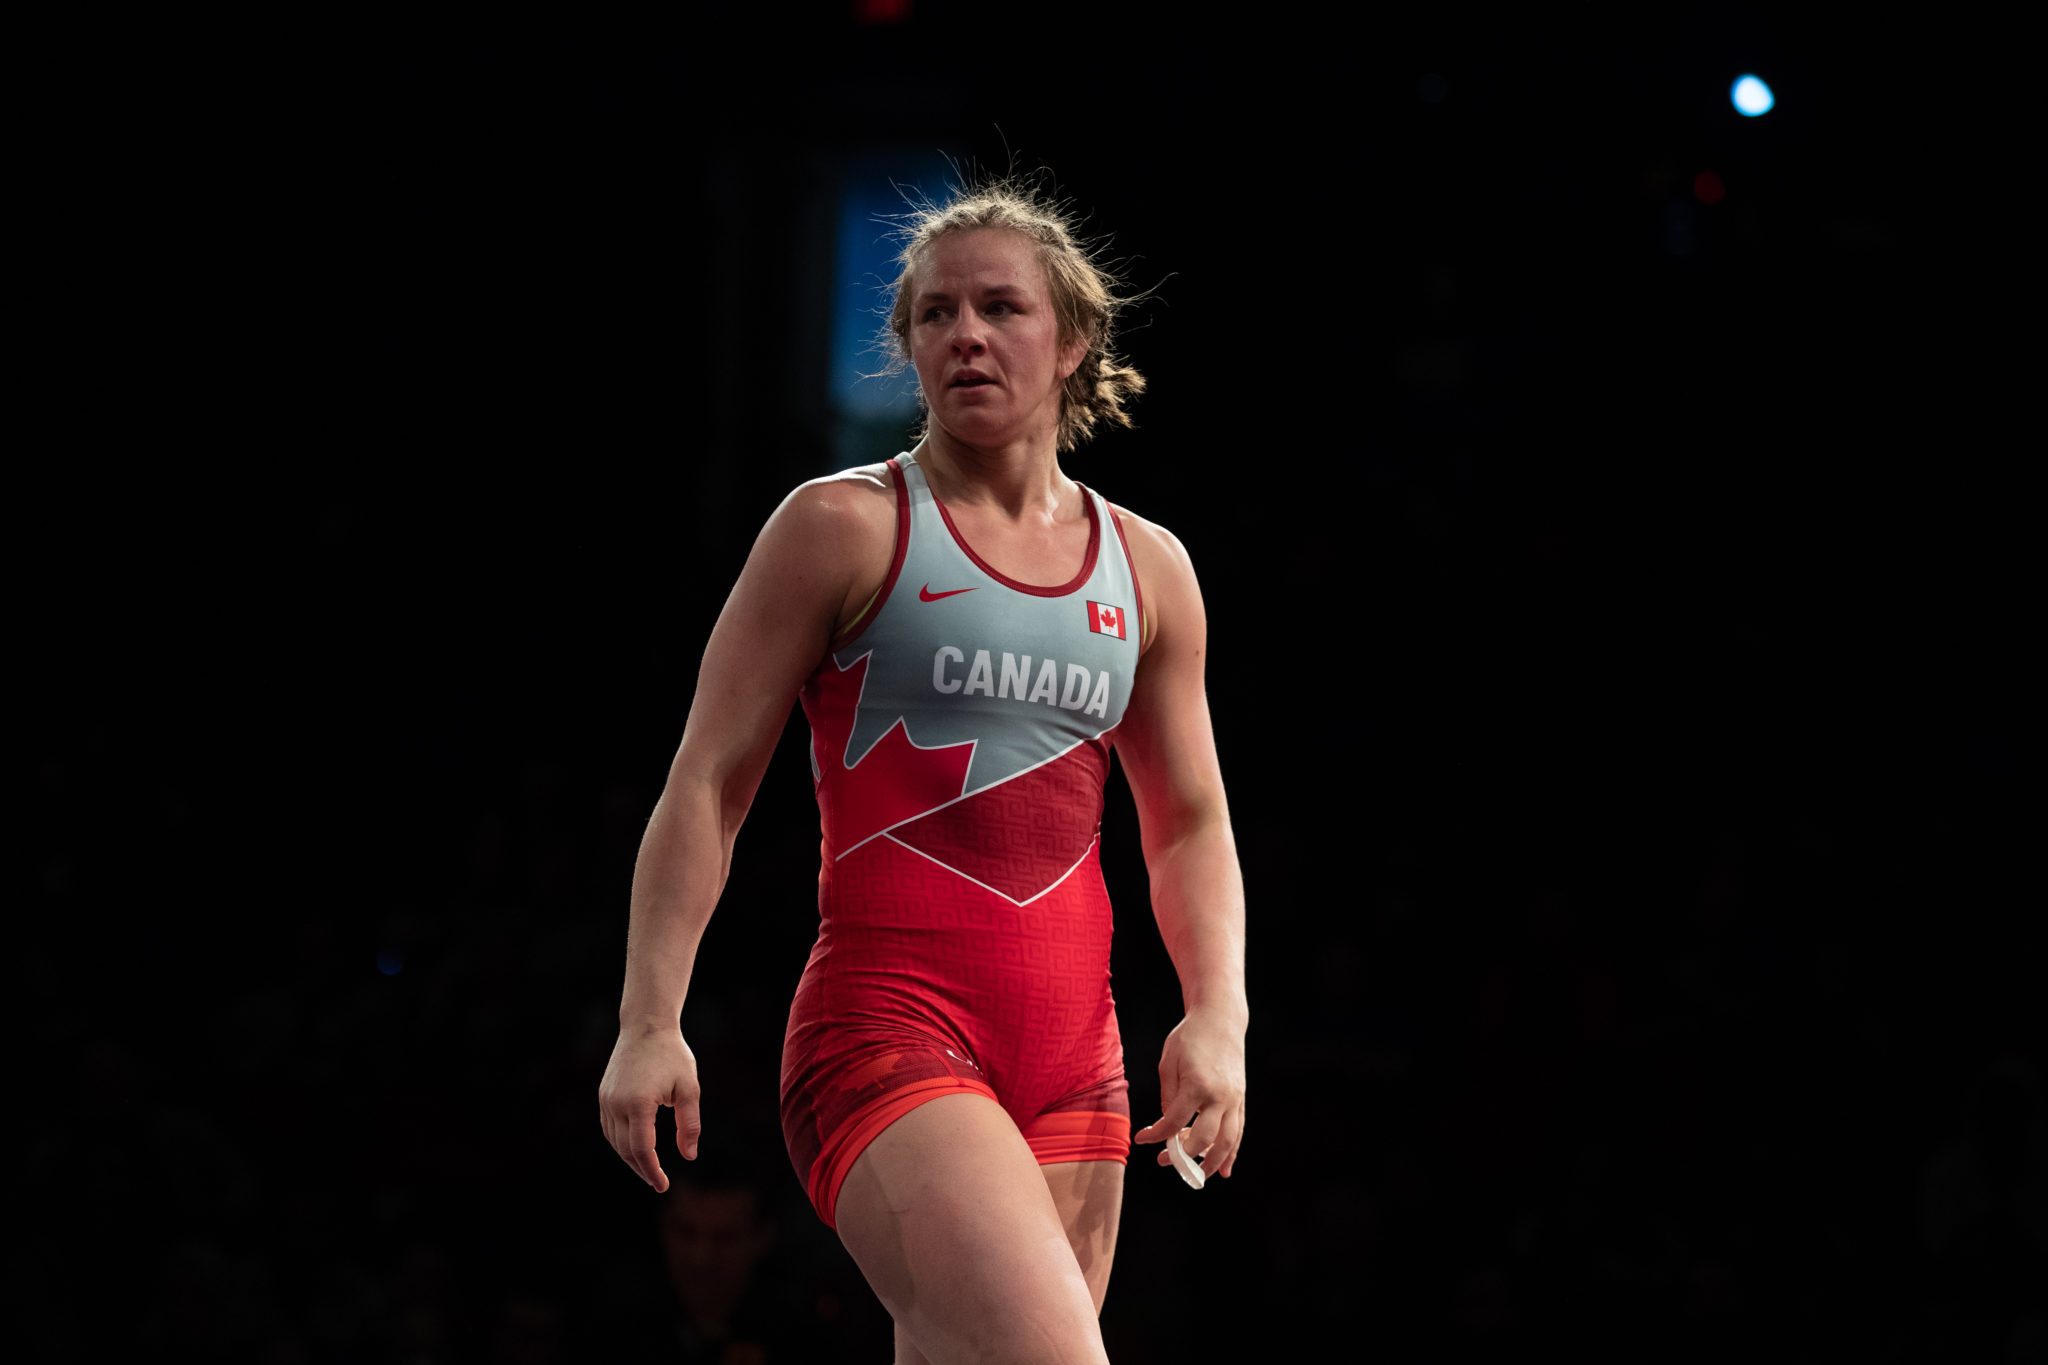 Wiebe wins gold at the Matteo Pellicone Ranking Series Wrestling